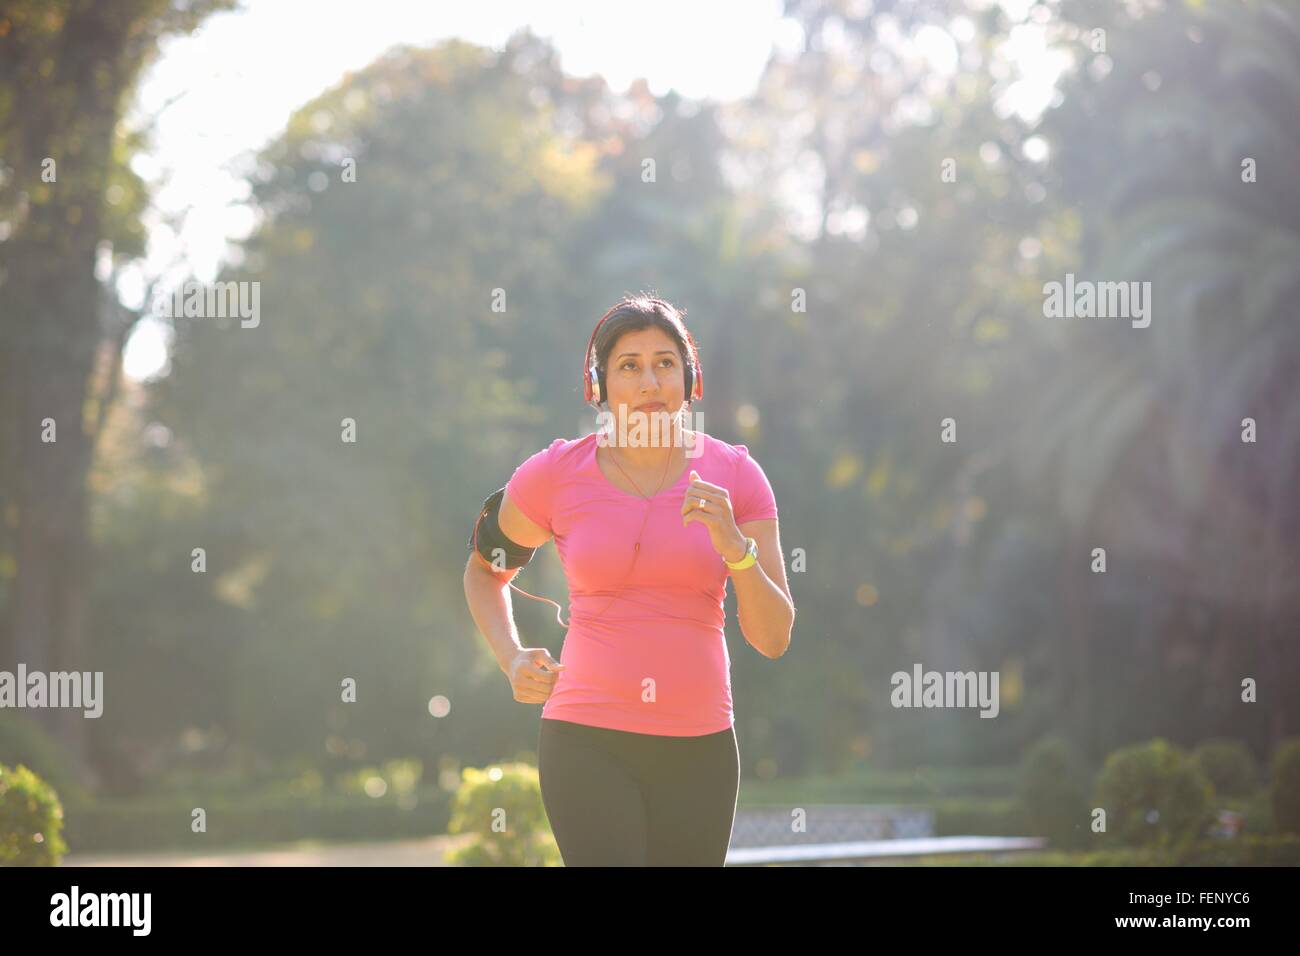 Front view of mature woman wearing headphones and armband jogging in park Stock Photo